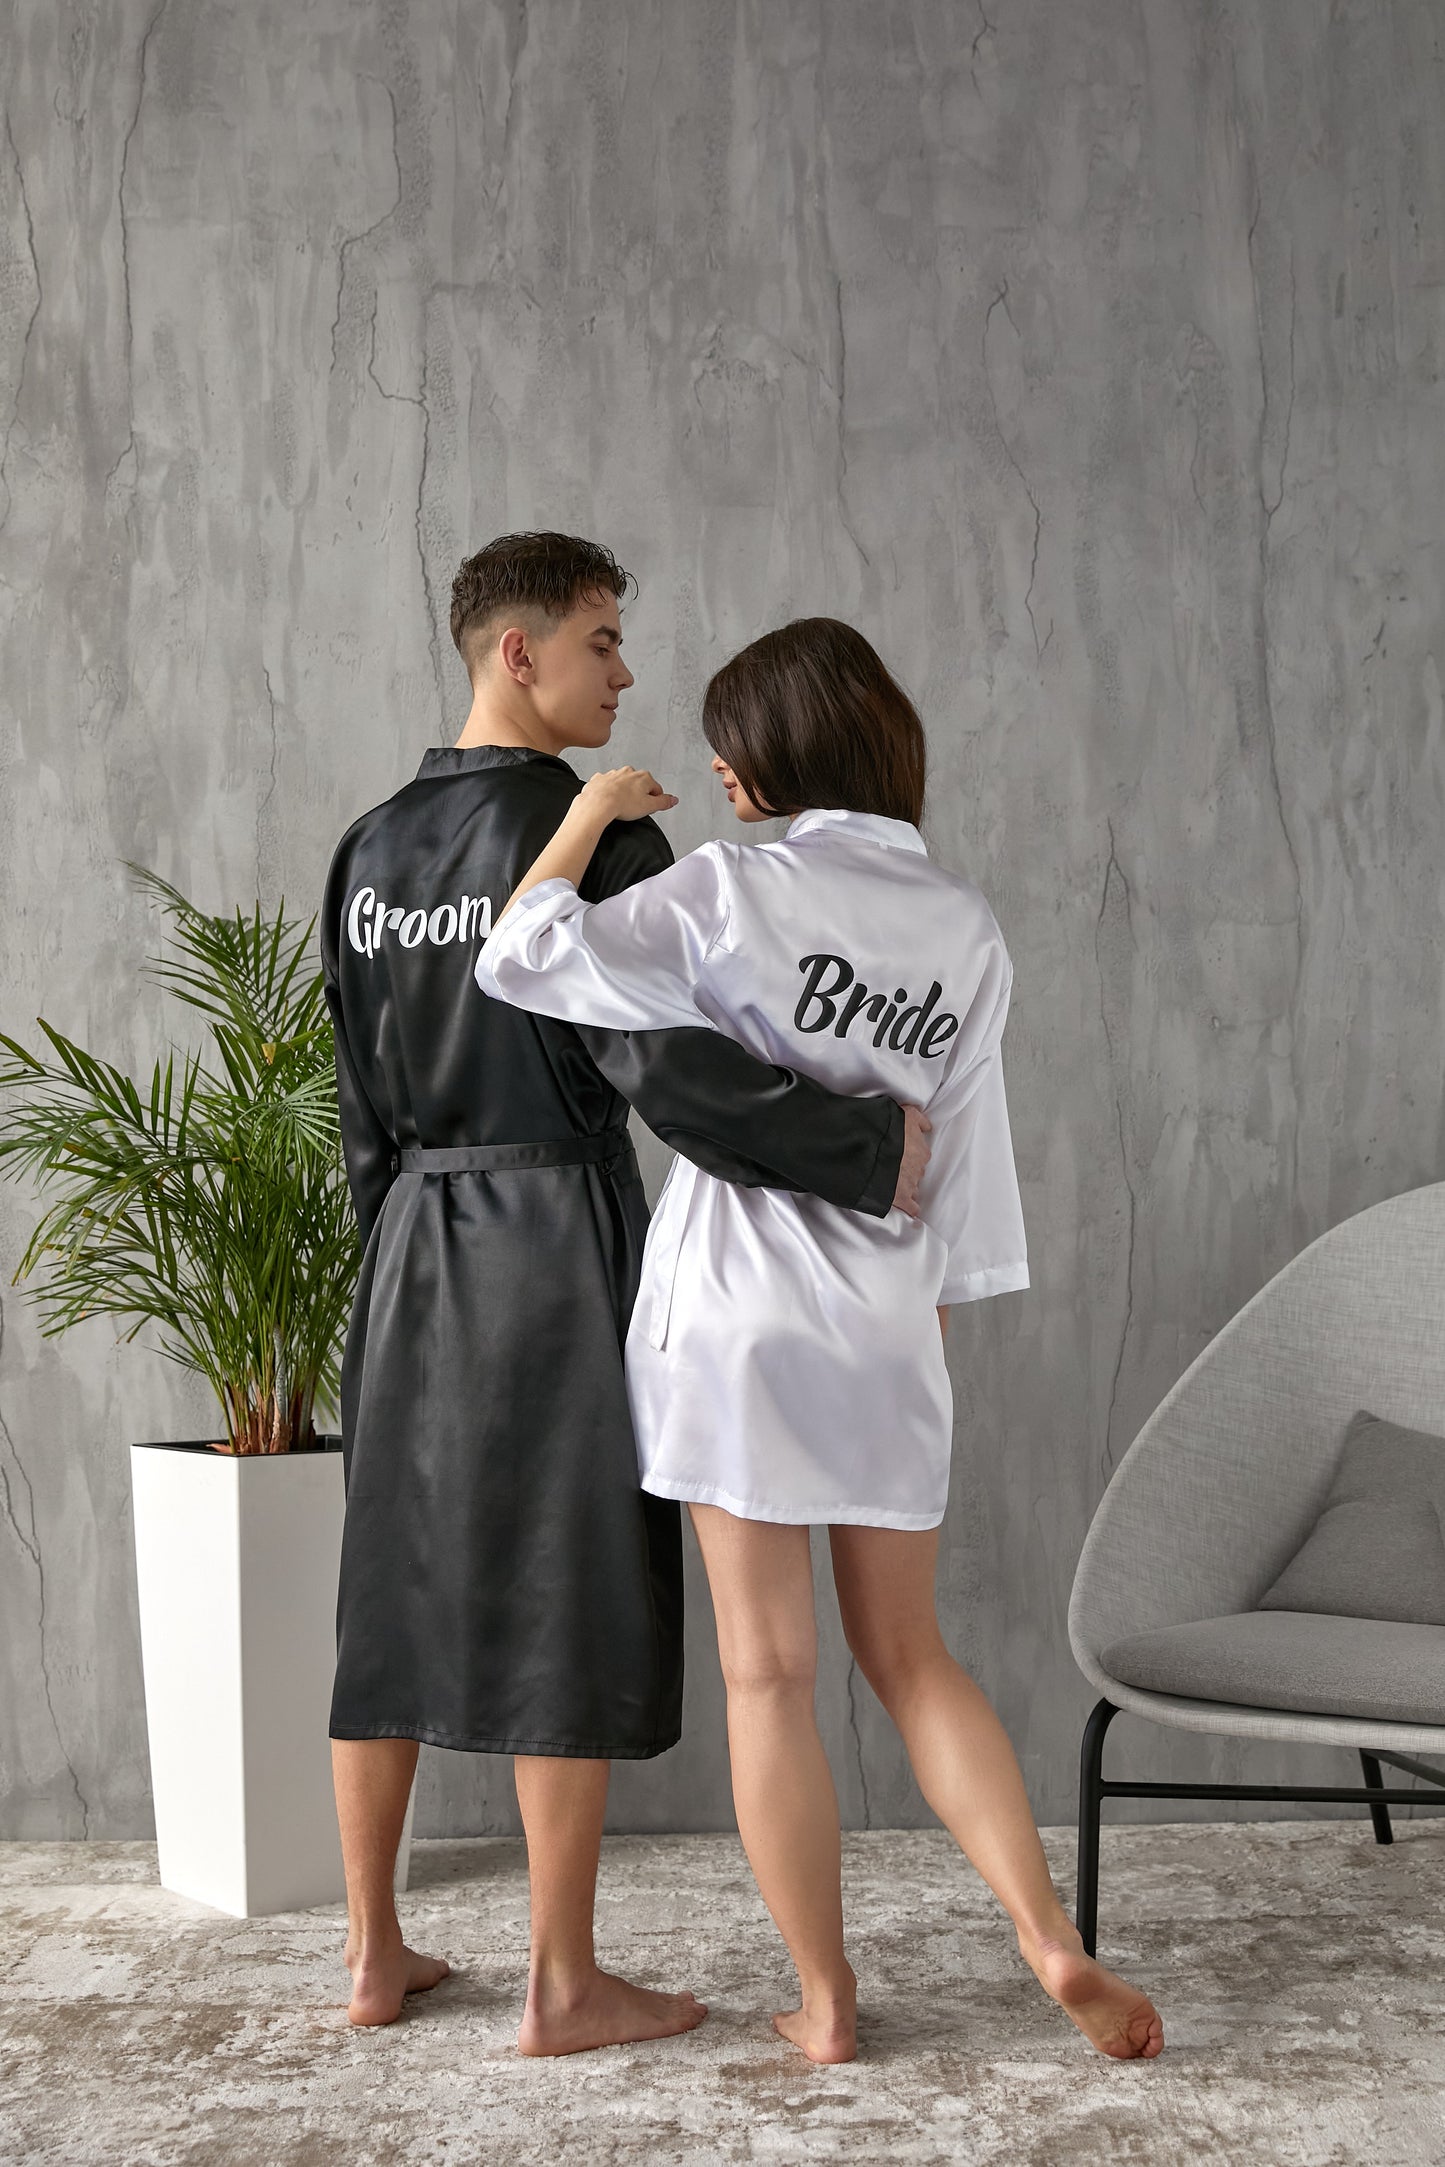 King and Queen Satin Robes